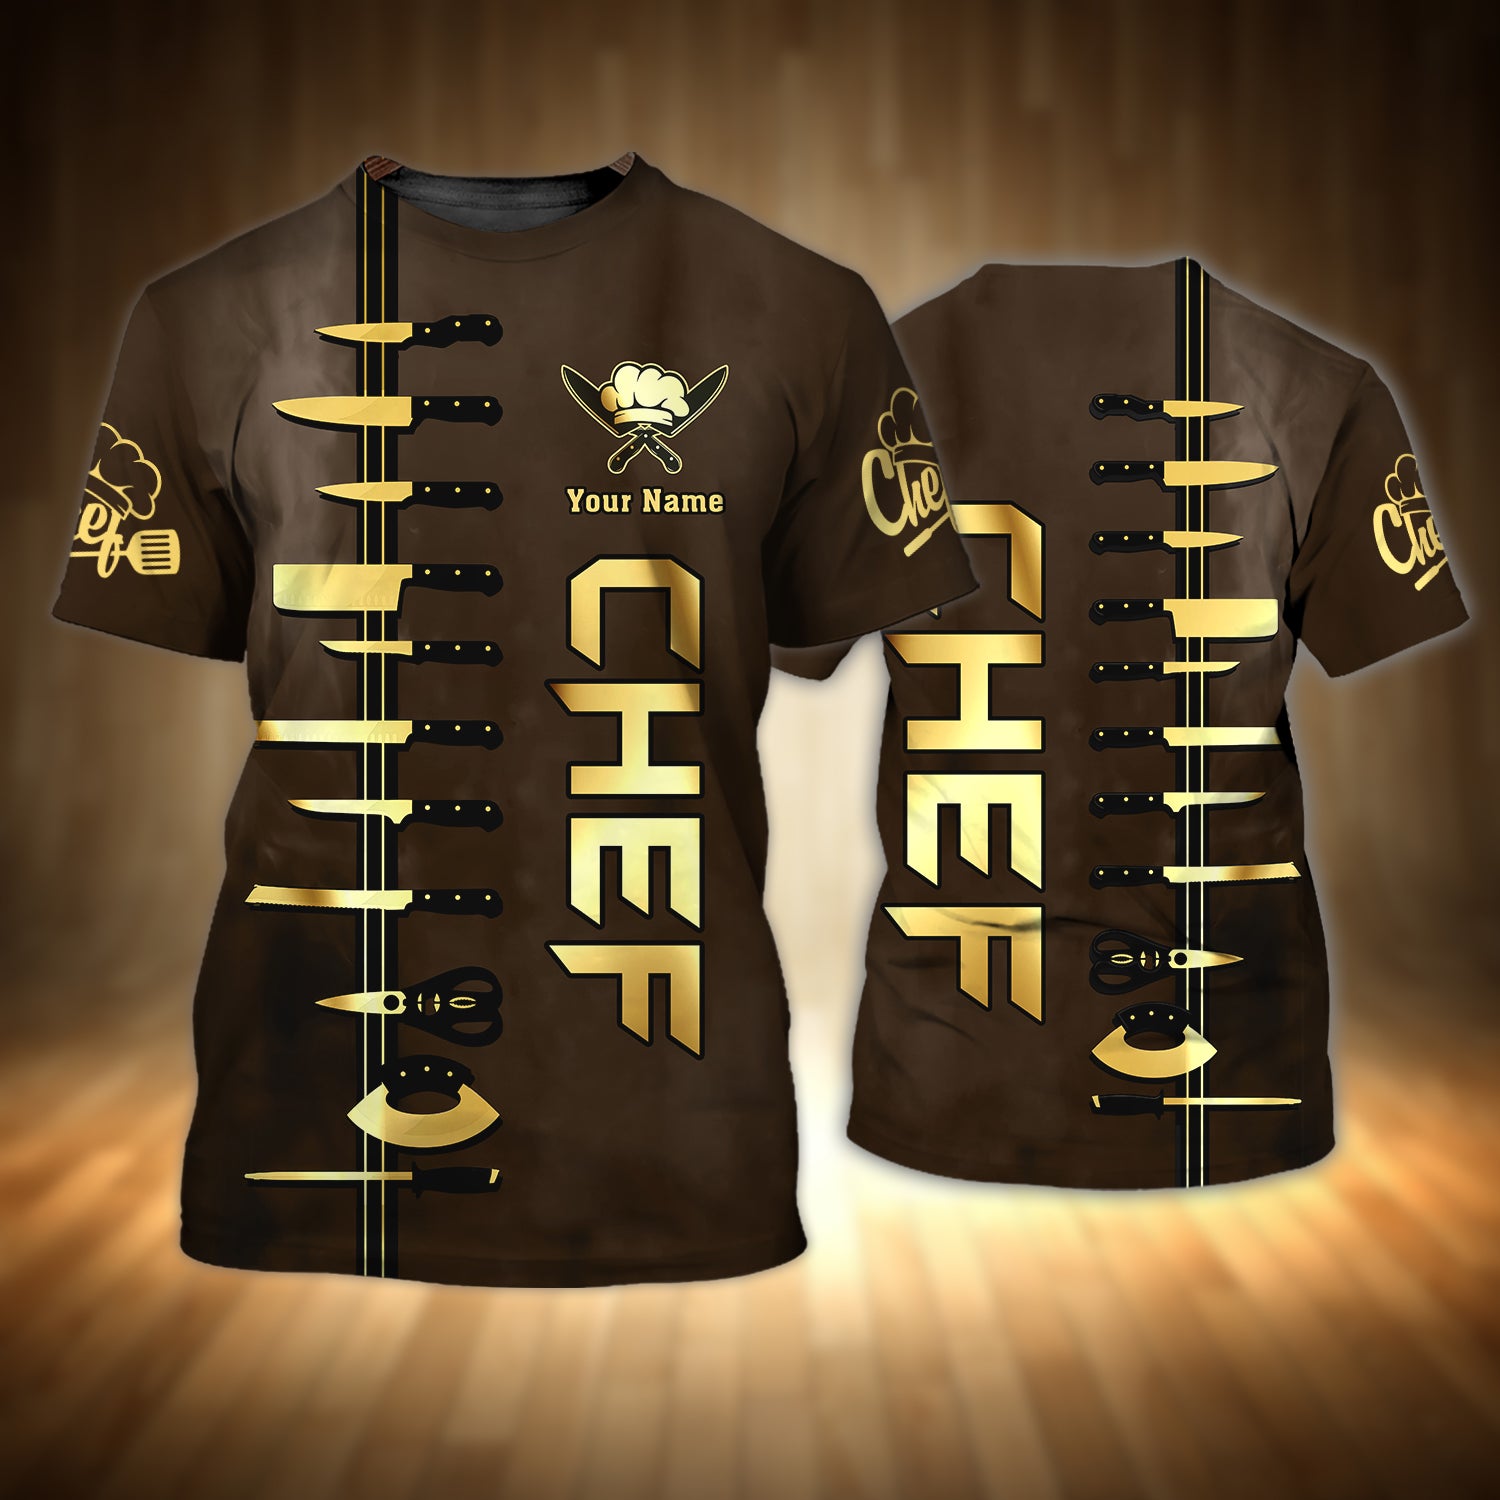 CHEF - Personalized Name 3D Tshirt 27 - RINC98 (Brown & Gold)